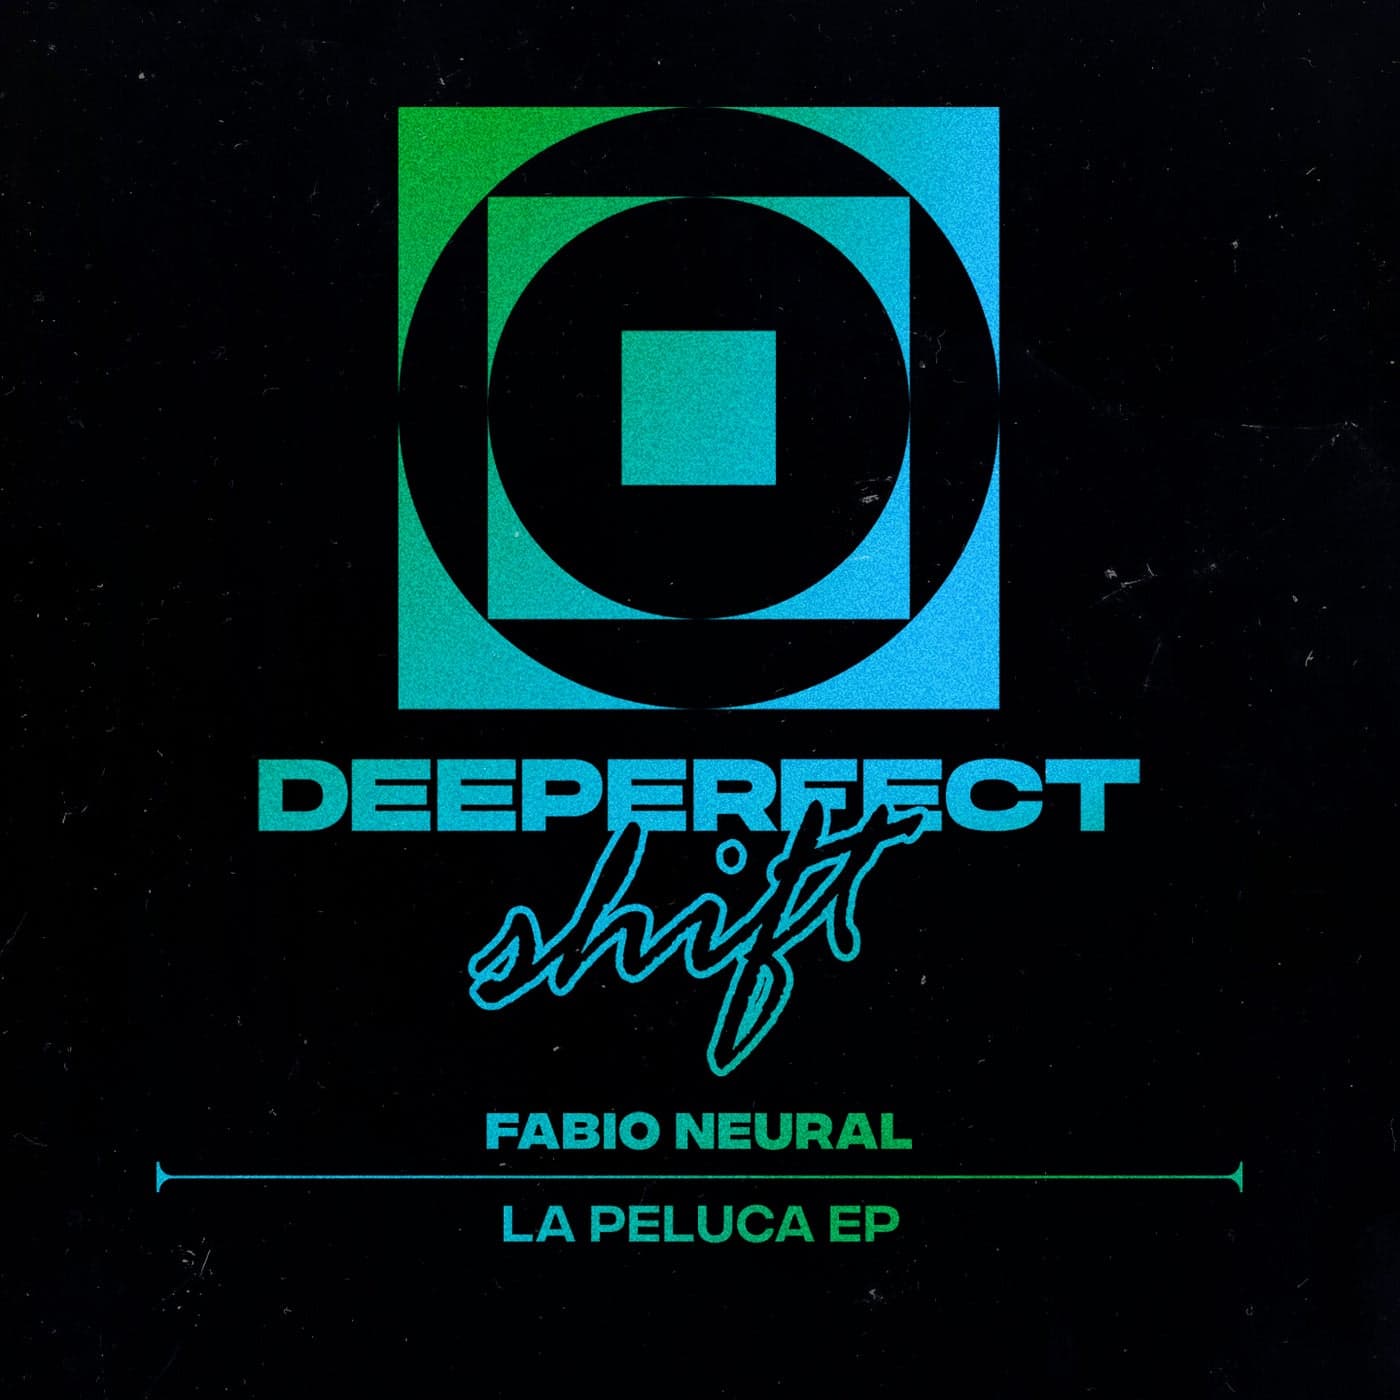 image cover: La Peluca EP by Fabio Neural on Deeperfect Shift